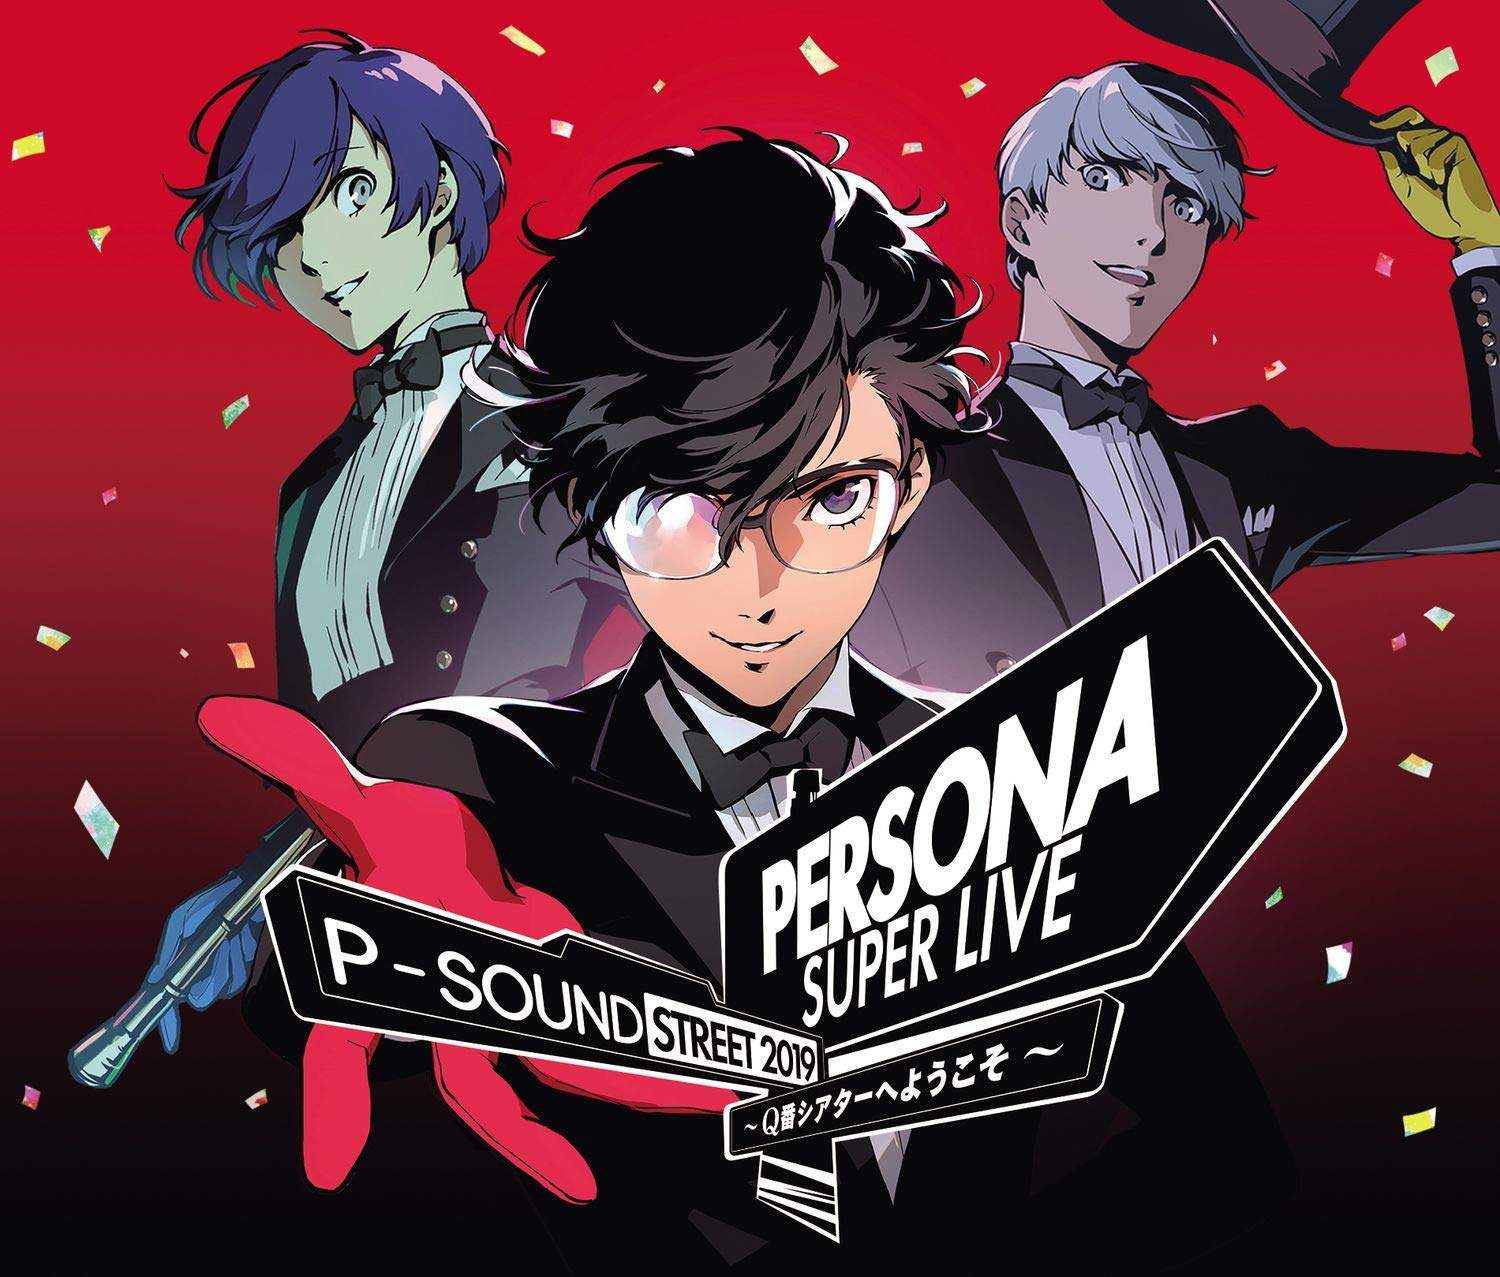 PERSONA SUPER LIVE P-SOUND STREET 2019 ~Q-ban Theater e Youkoso~ PERSONA SUPER LIVE P-SOUND STREET 2019 ～Q番シアターへようこそ～ Catalog Number VICL-65275~7 Release Date Nov 27, 2019 Publish Format Commercial Release Price 4180 JPY Media Format 3 CD Classification Arrangement, Vocal, Live Event Published by Victor (distributed by JVCKENWOOD Victor Entertainment)